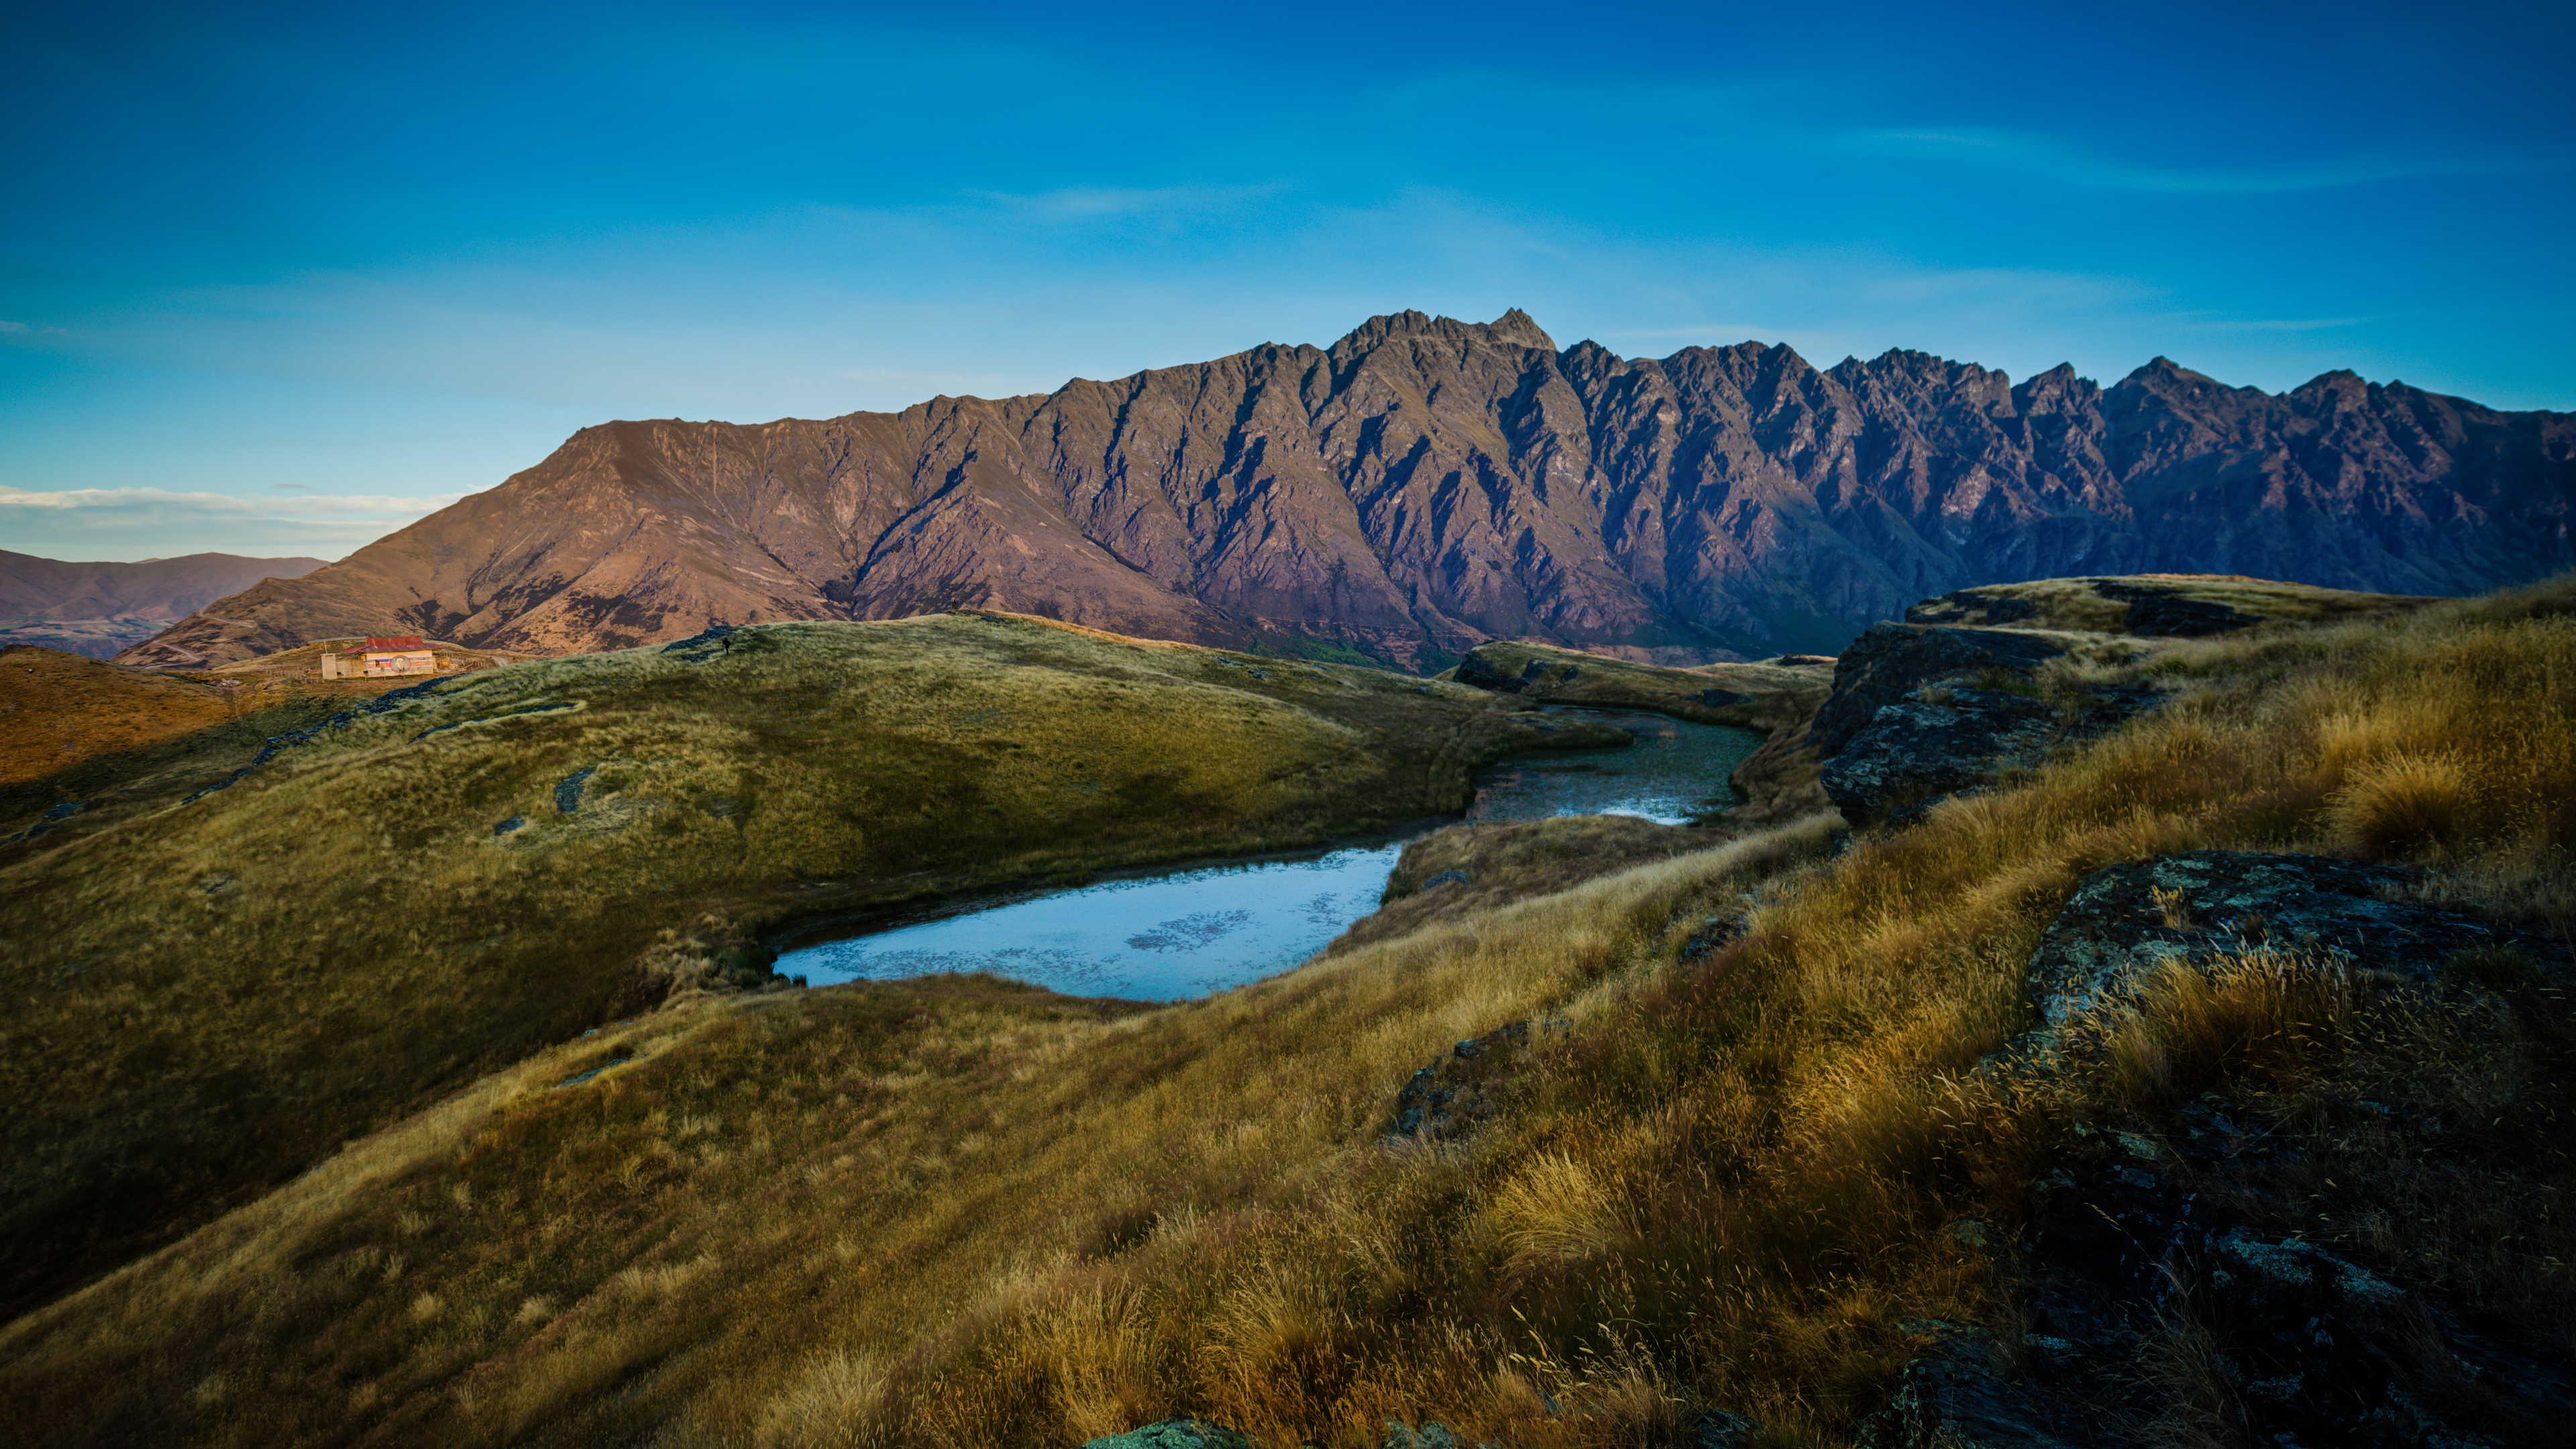 General 3840x2160 landscape 4K New Zealand nature mountains water sky